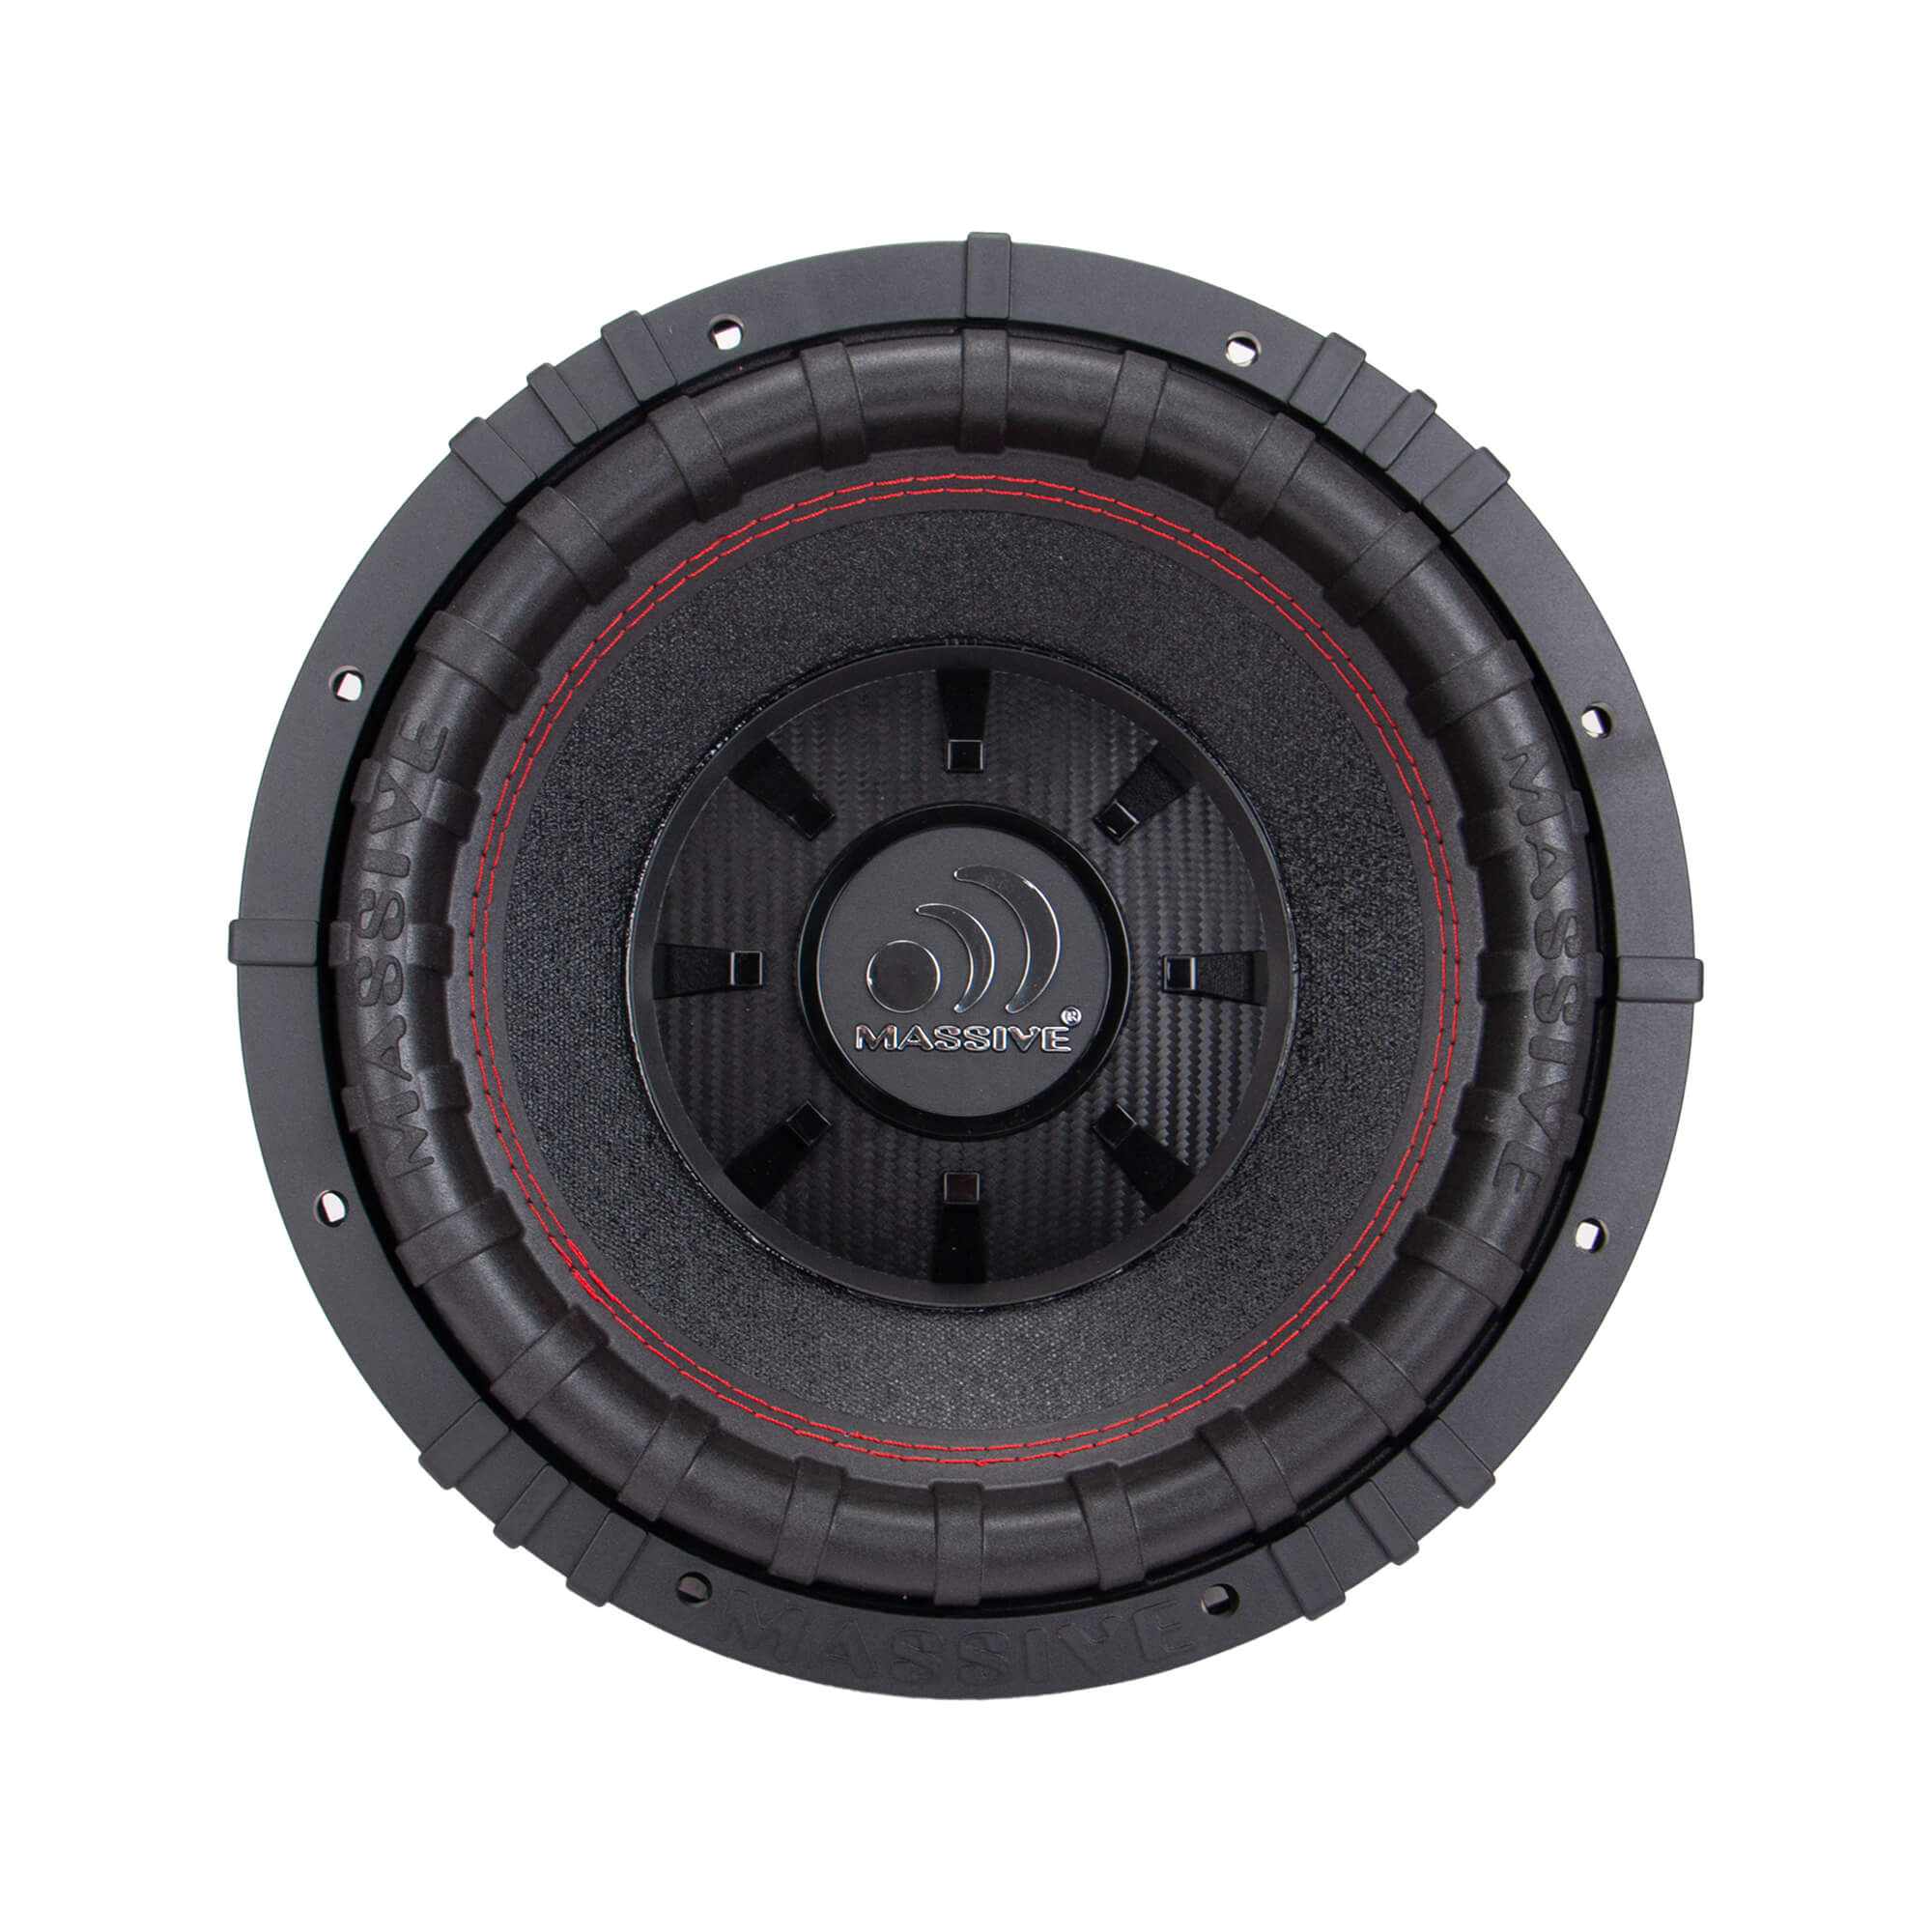 GTR124 - 12" 1000 Watts RMS Dual 4 Ohm Subwoofer